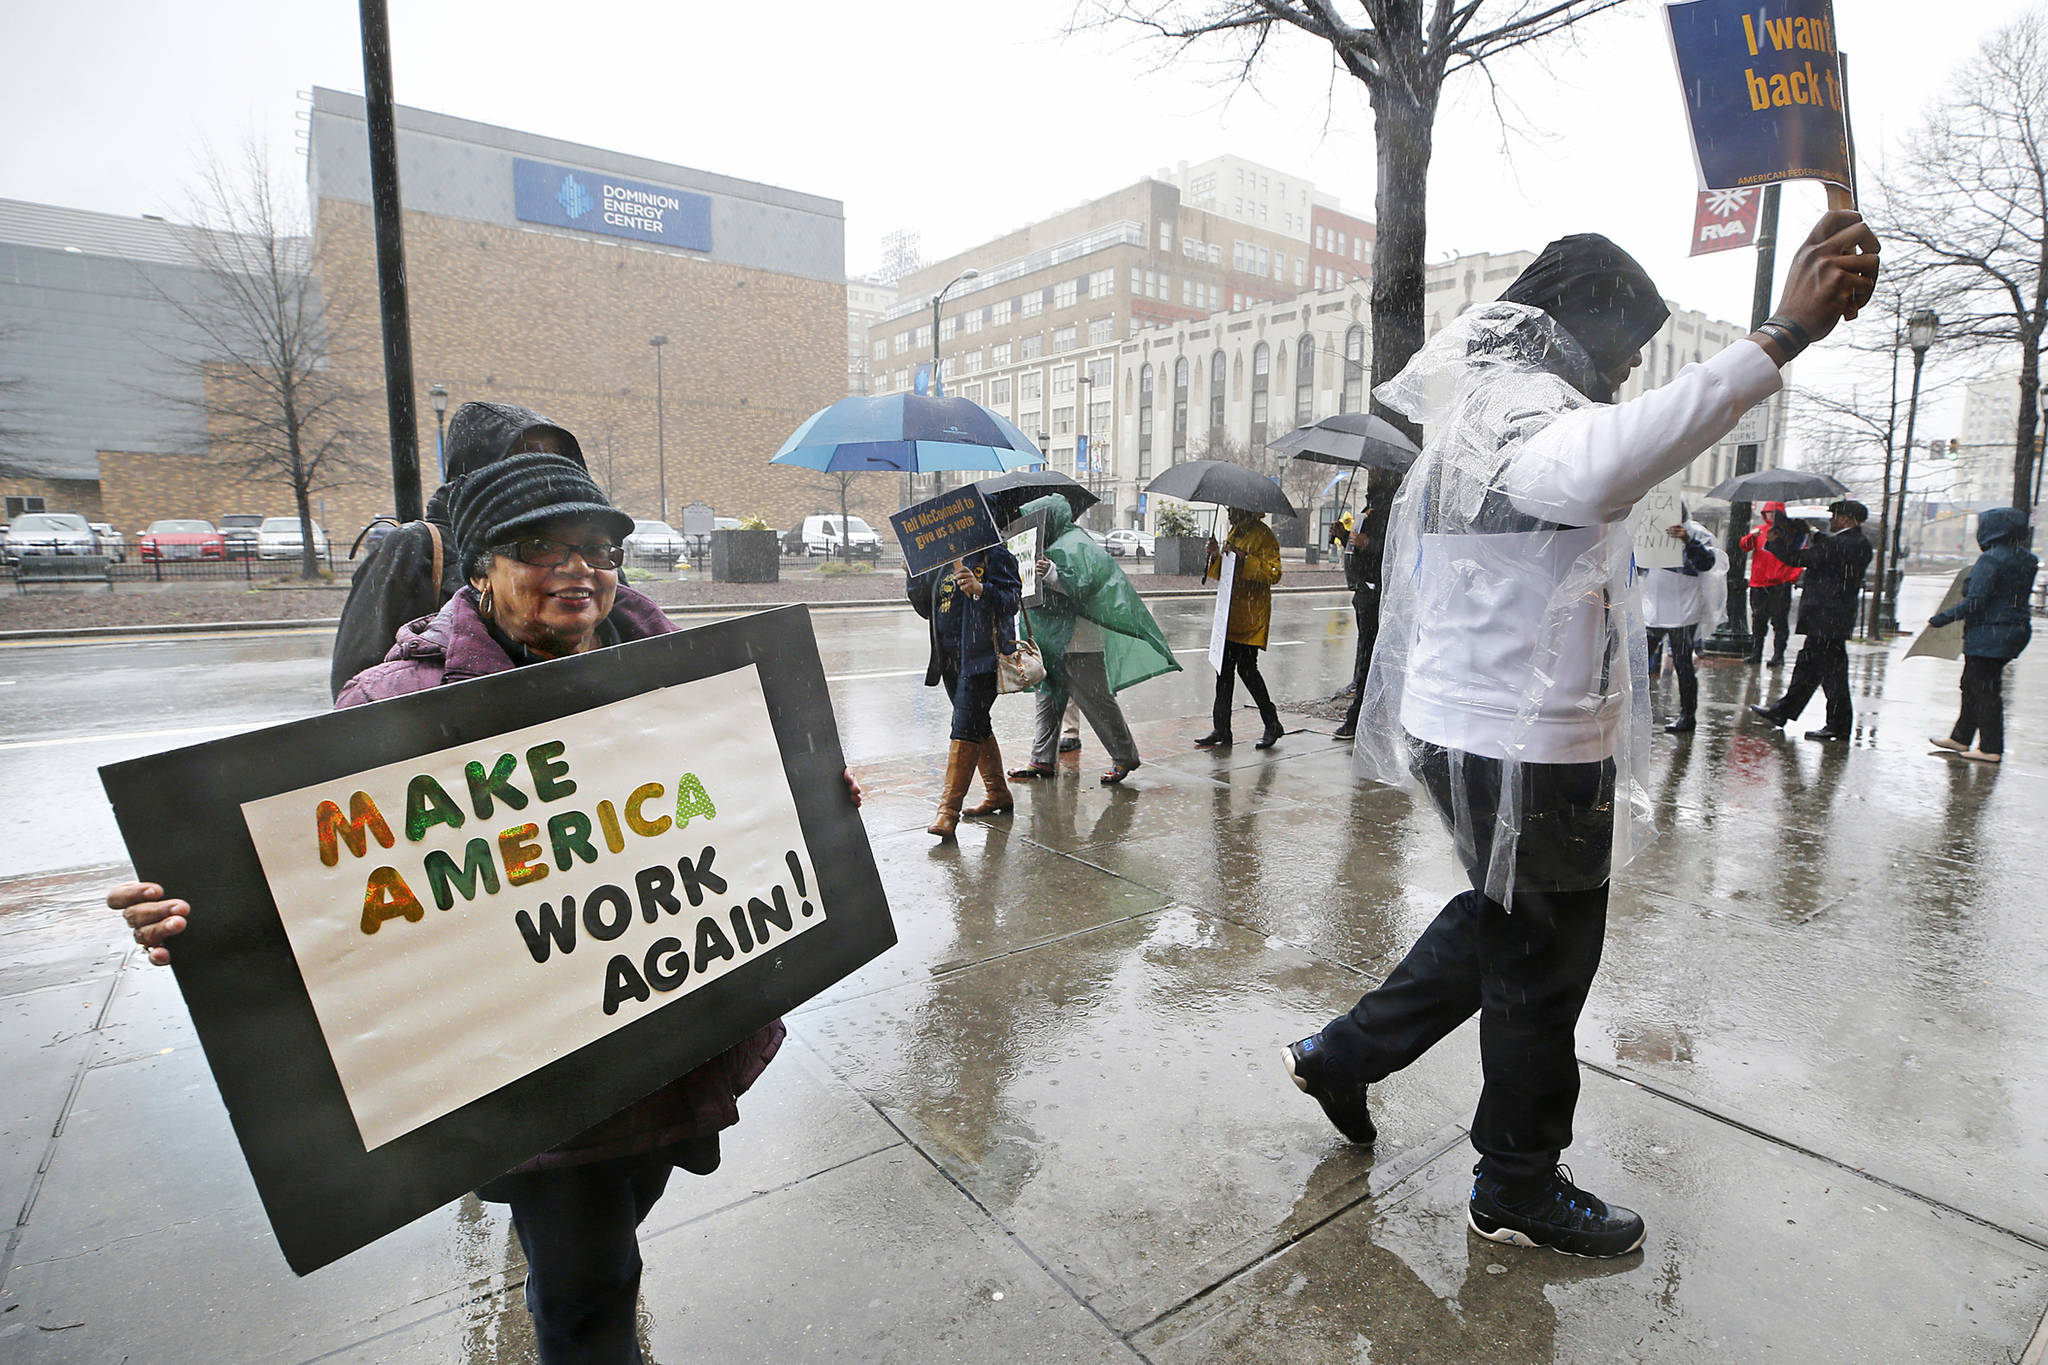 At left, Ann Taylor, HUD retiree and president of AFGE Local 3380, demonstrates to support The U.S. Department of Housing and Urban Development and Bureau of Prisons employees who are affected by the partial government shutdown Thursday, Jan. 24, 2019. (Alexa Welch Edlund | Richmond Times-Dispatch)